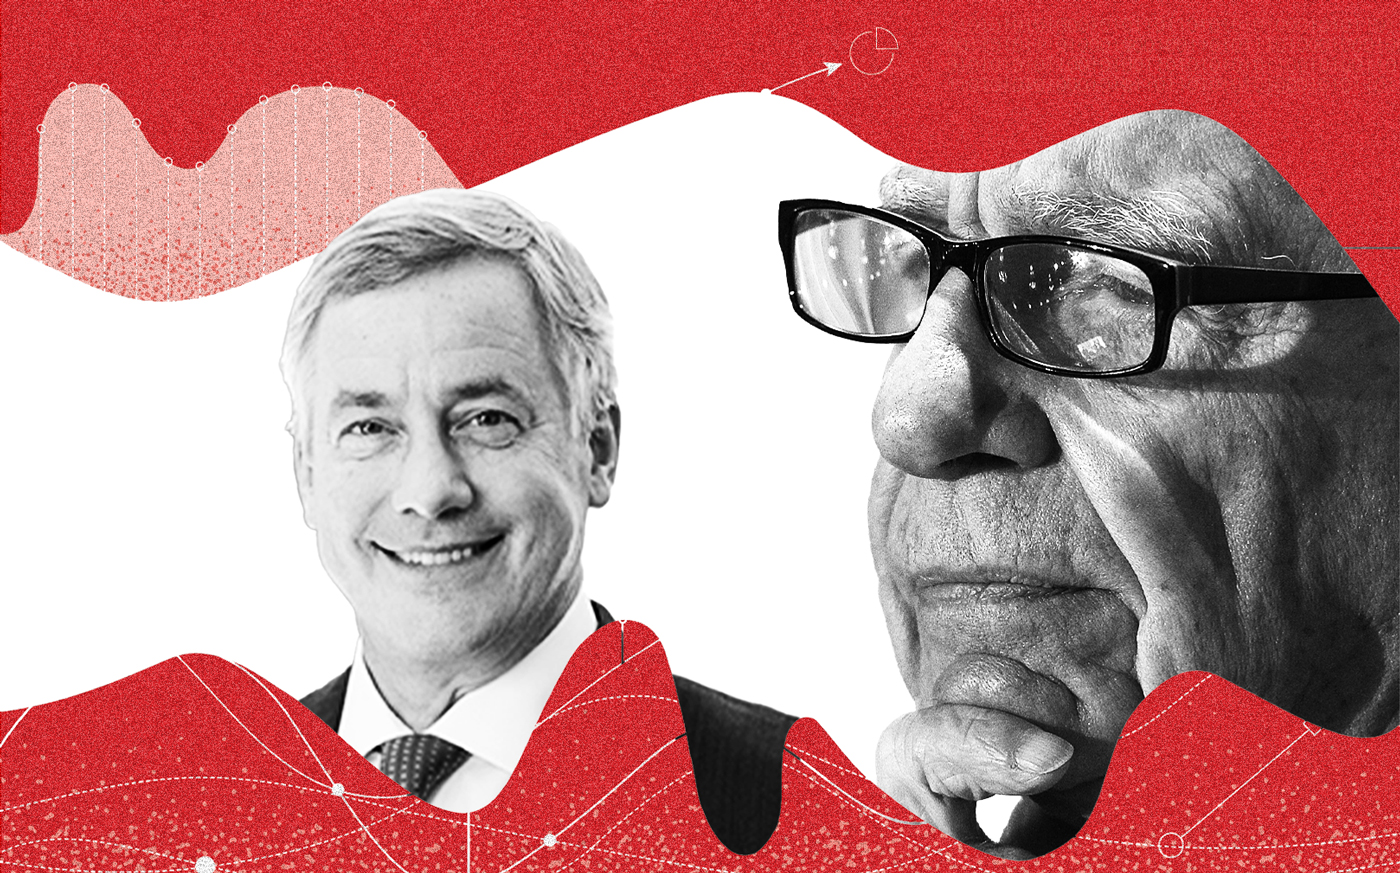 CoStar Group’s Andrew Florance and News Corporation's Rupert Murdoch